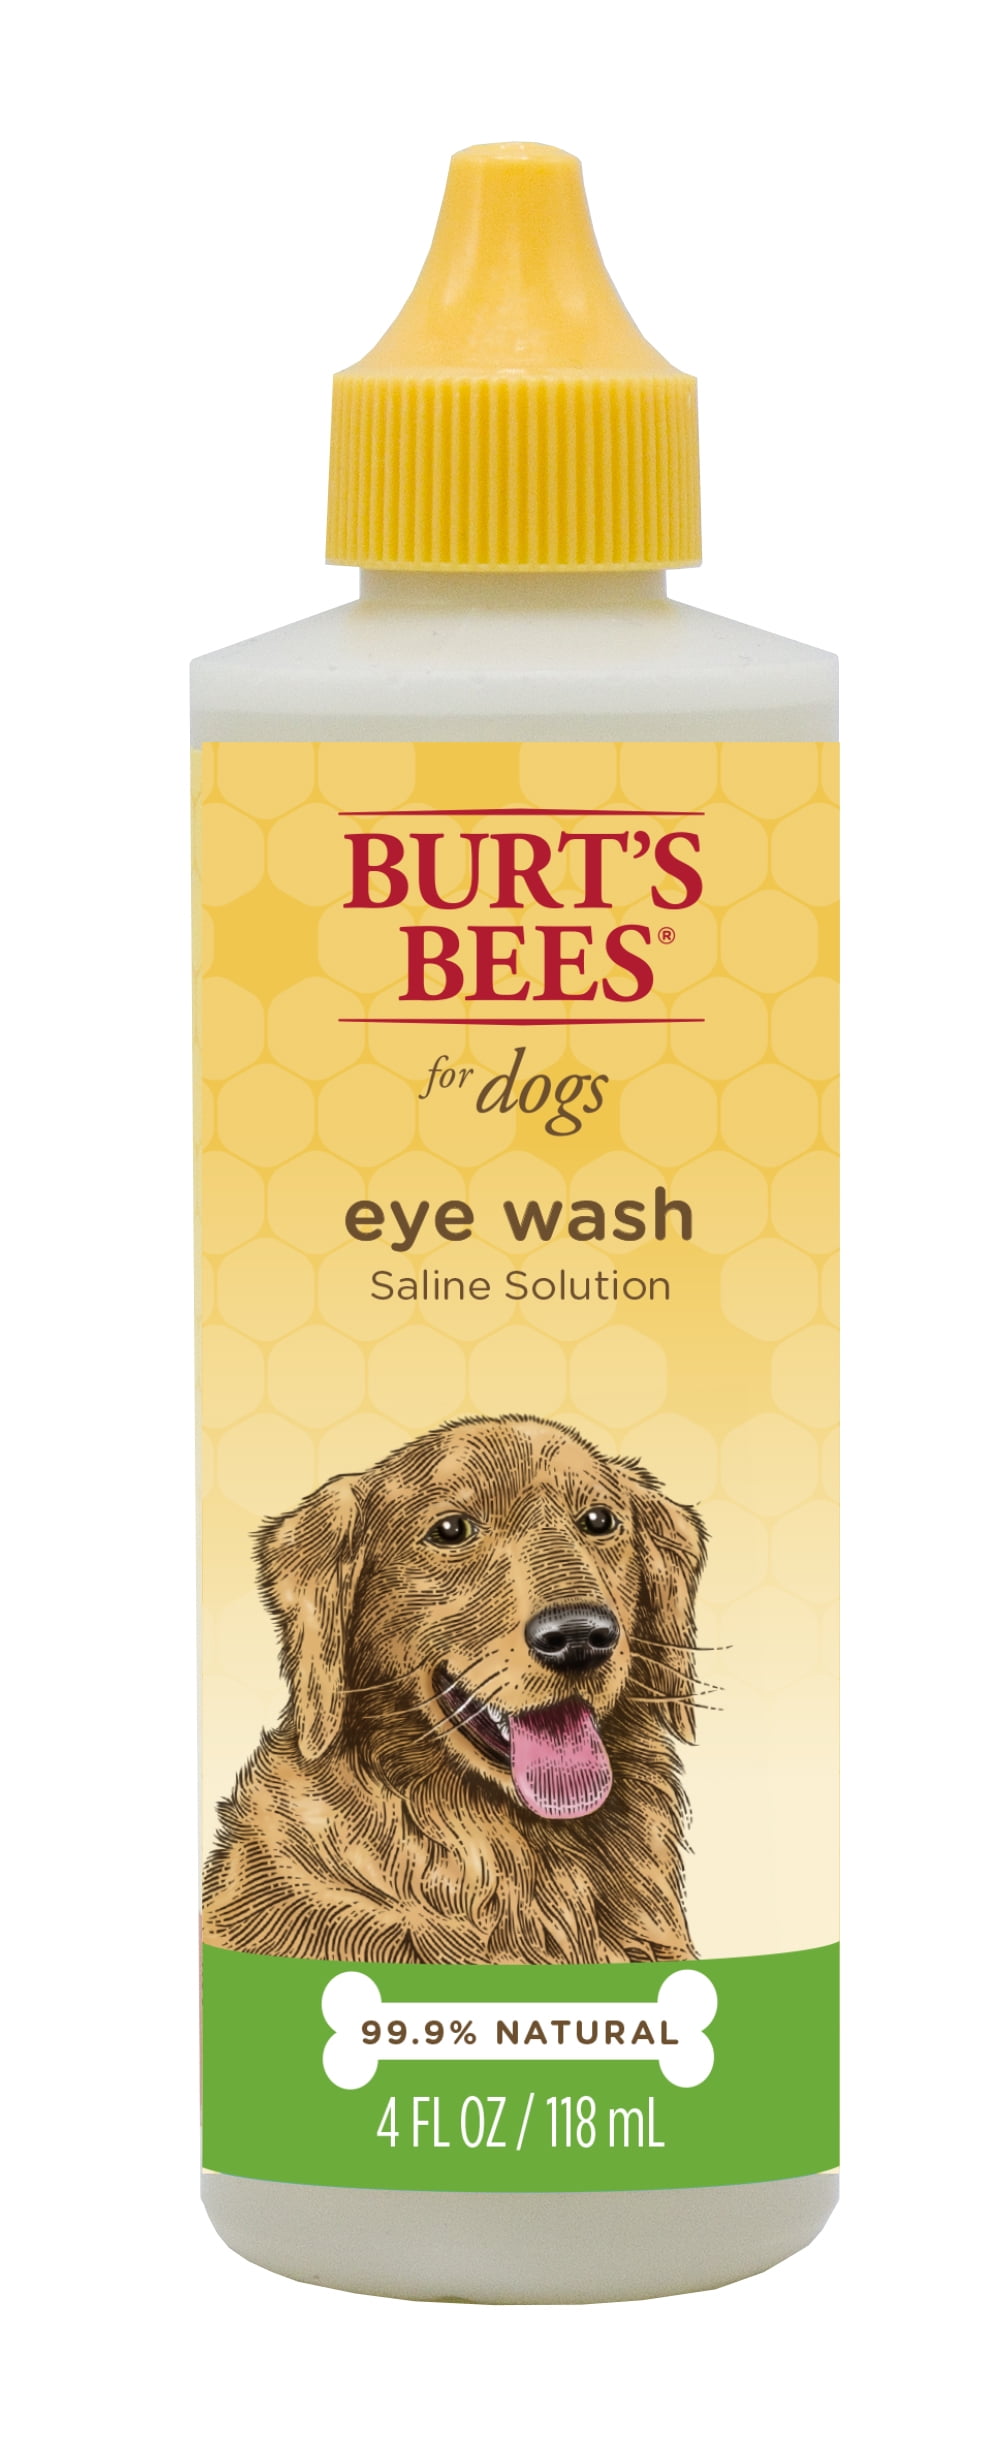 Burt's Bees Eye Wash Solution for Dogs 